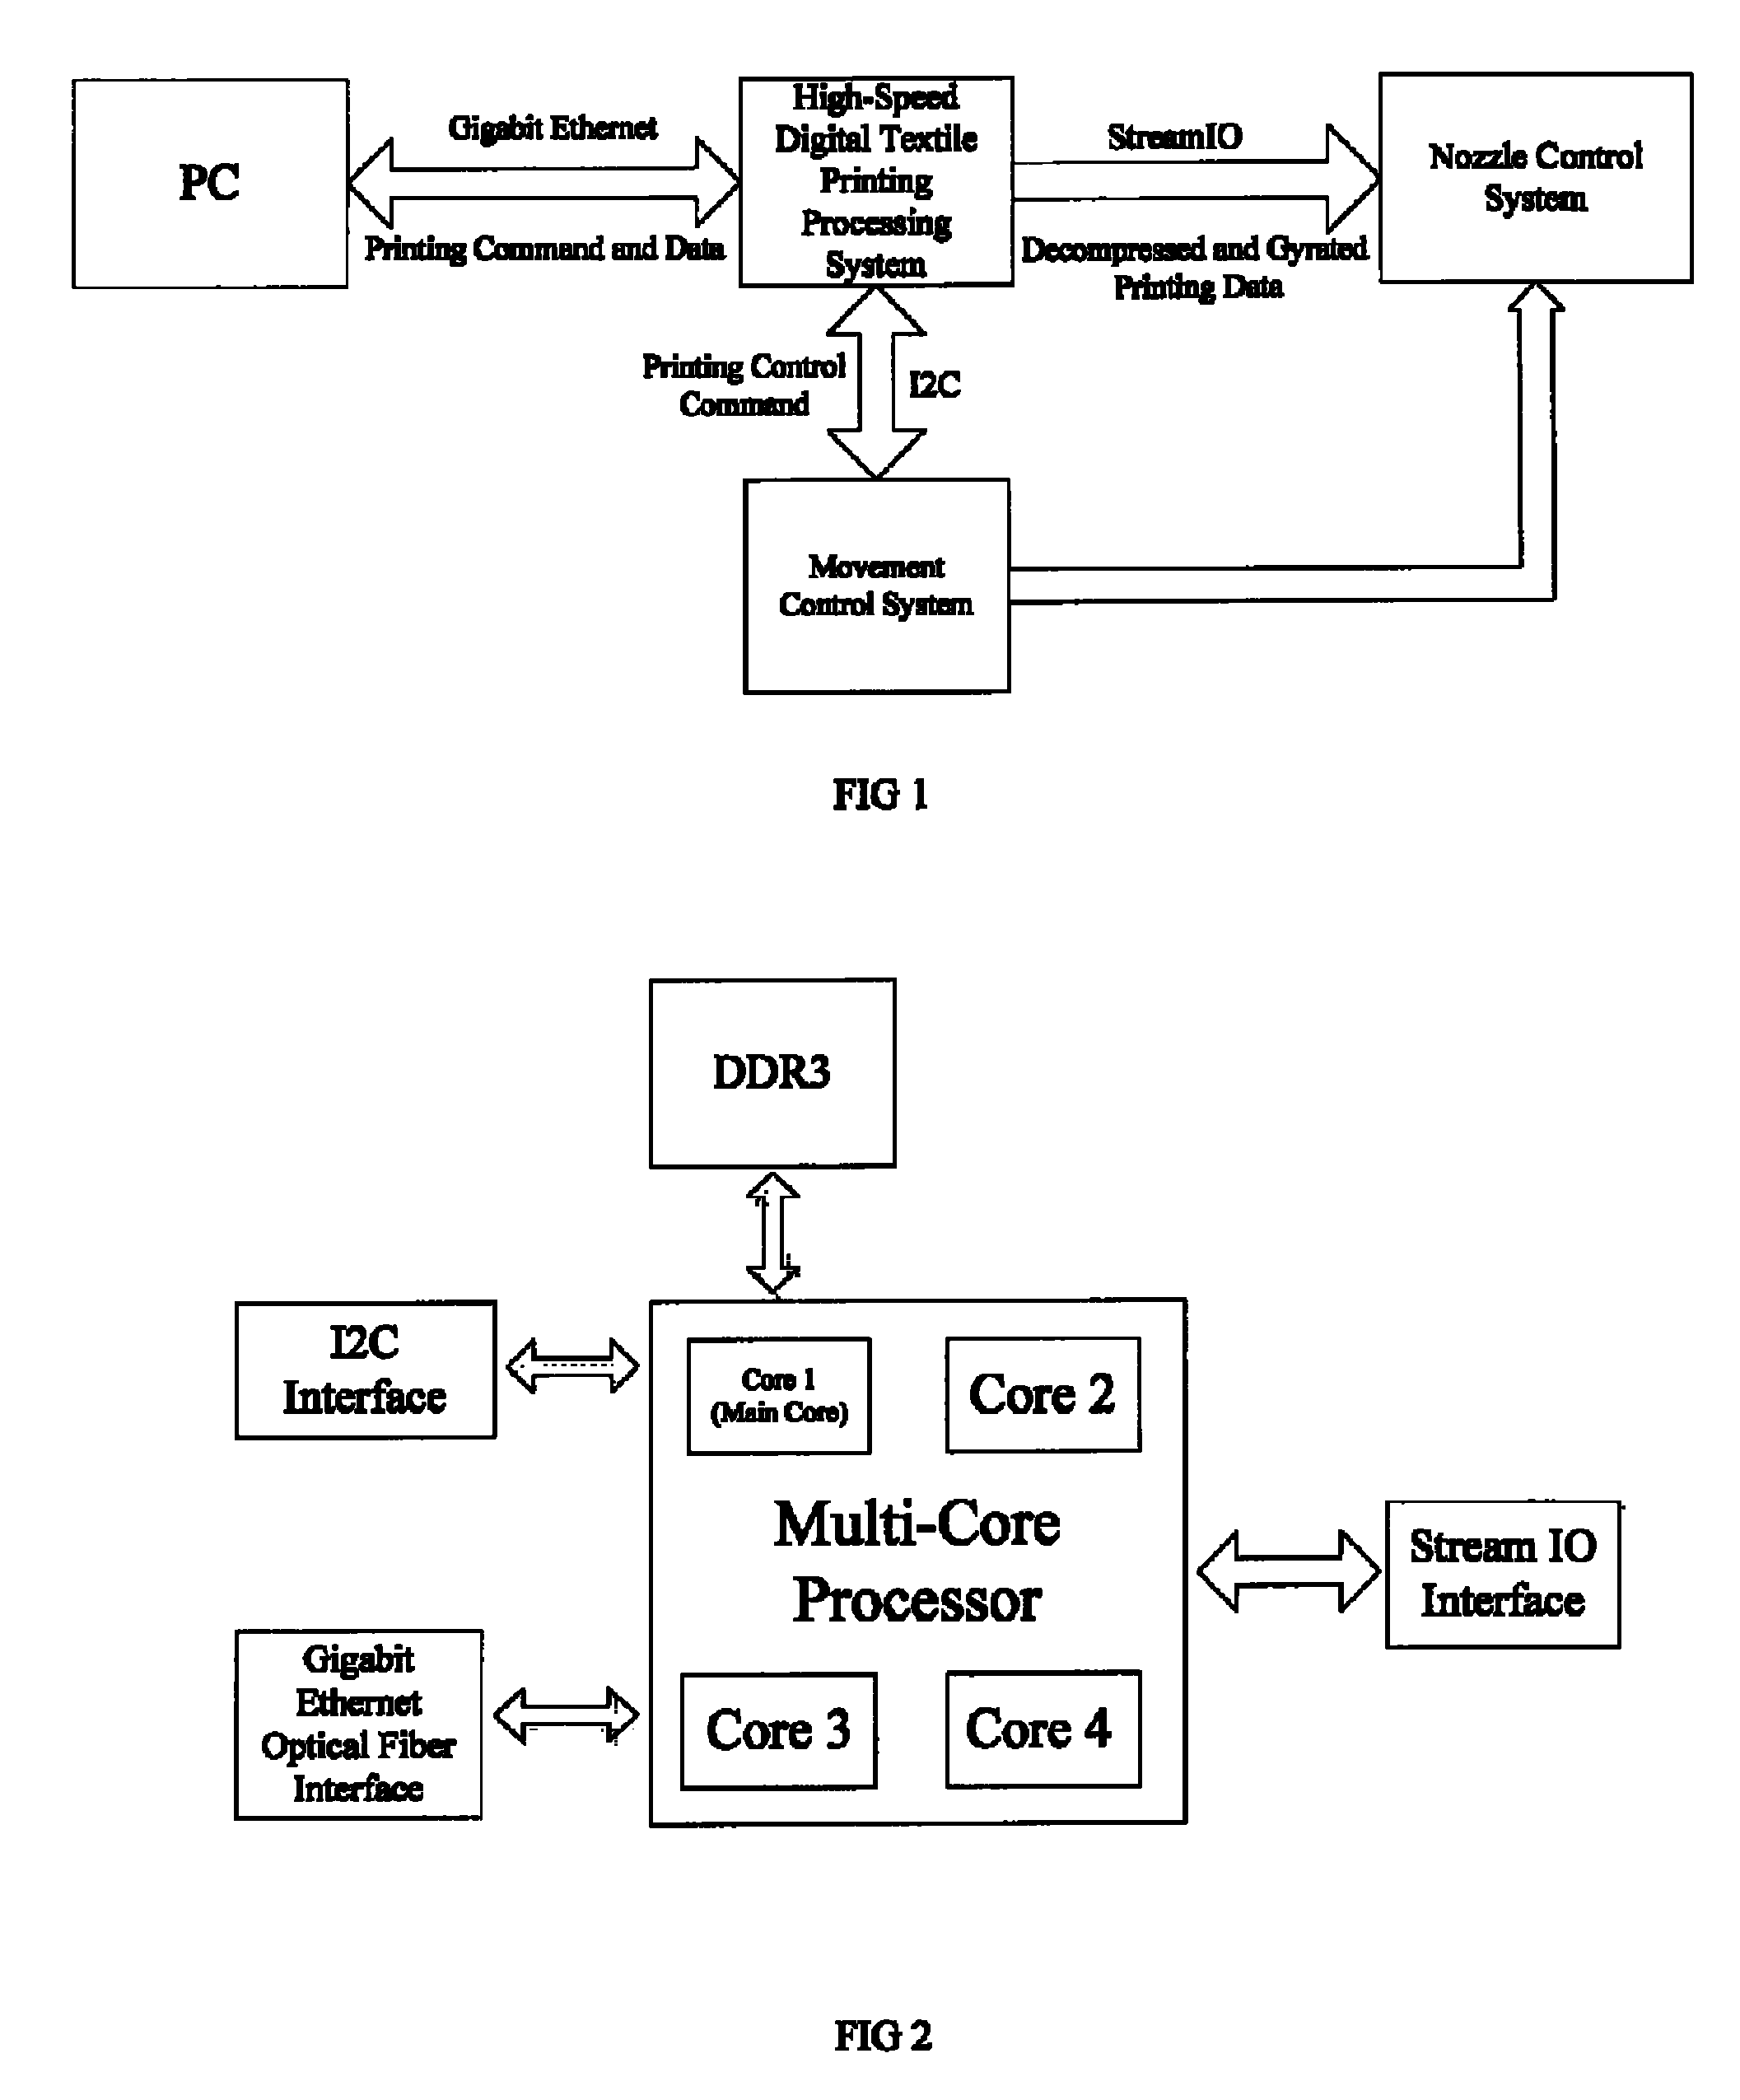 Multi-core processor based high-speed digital textile printing processing system and method